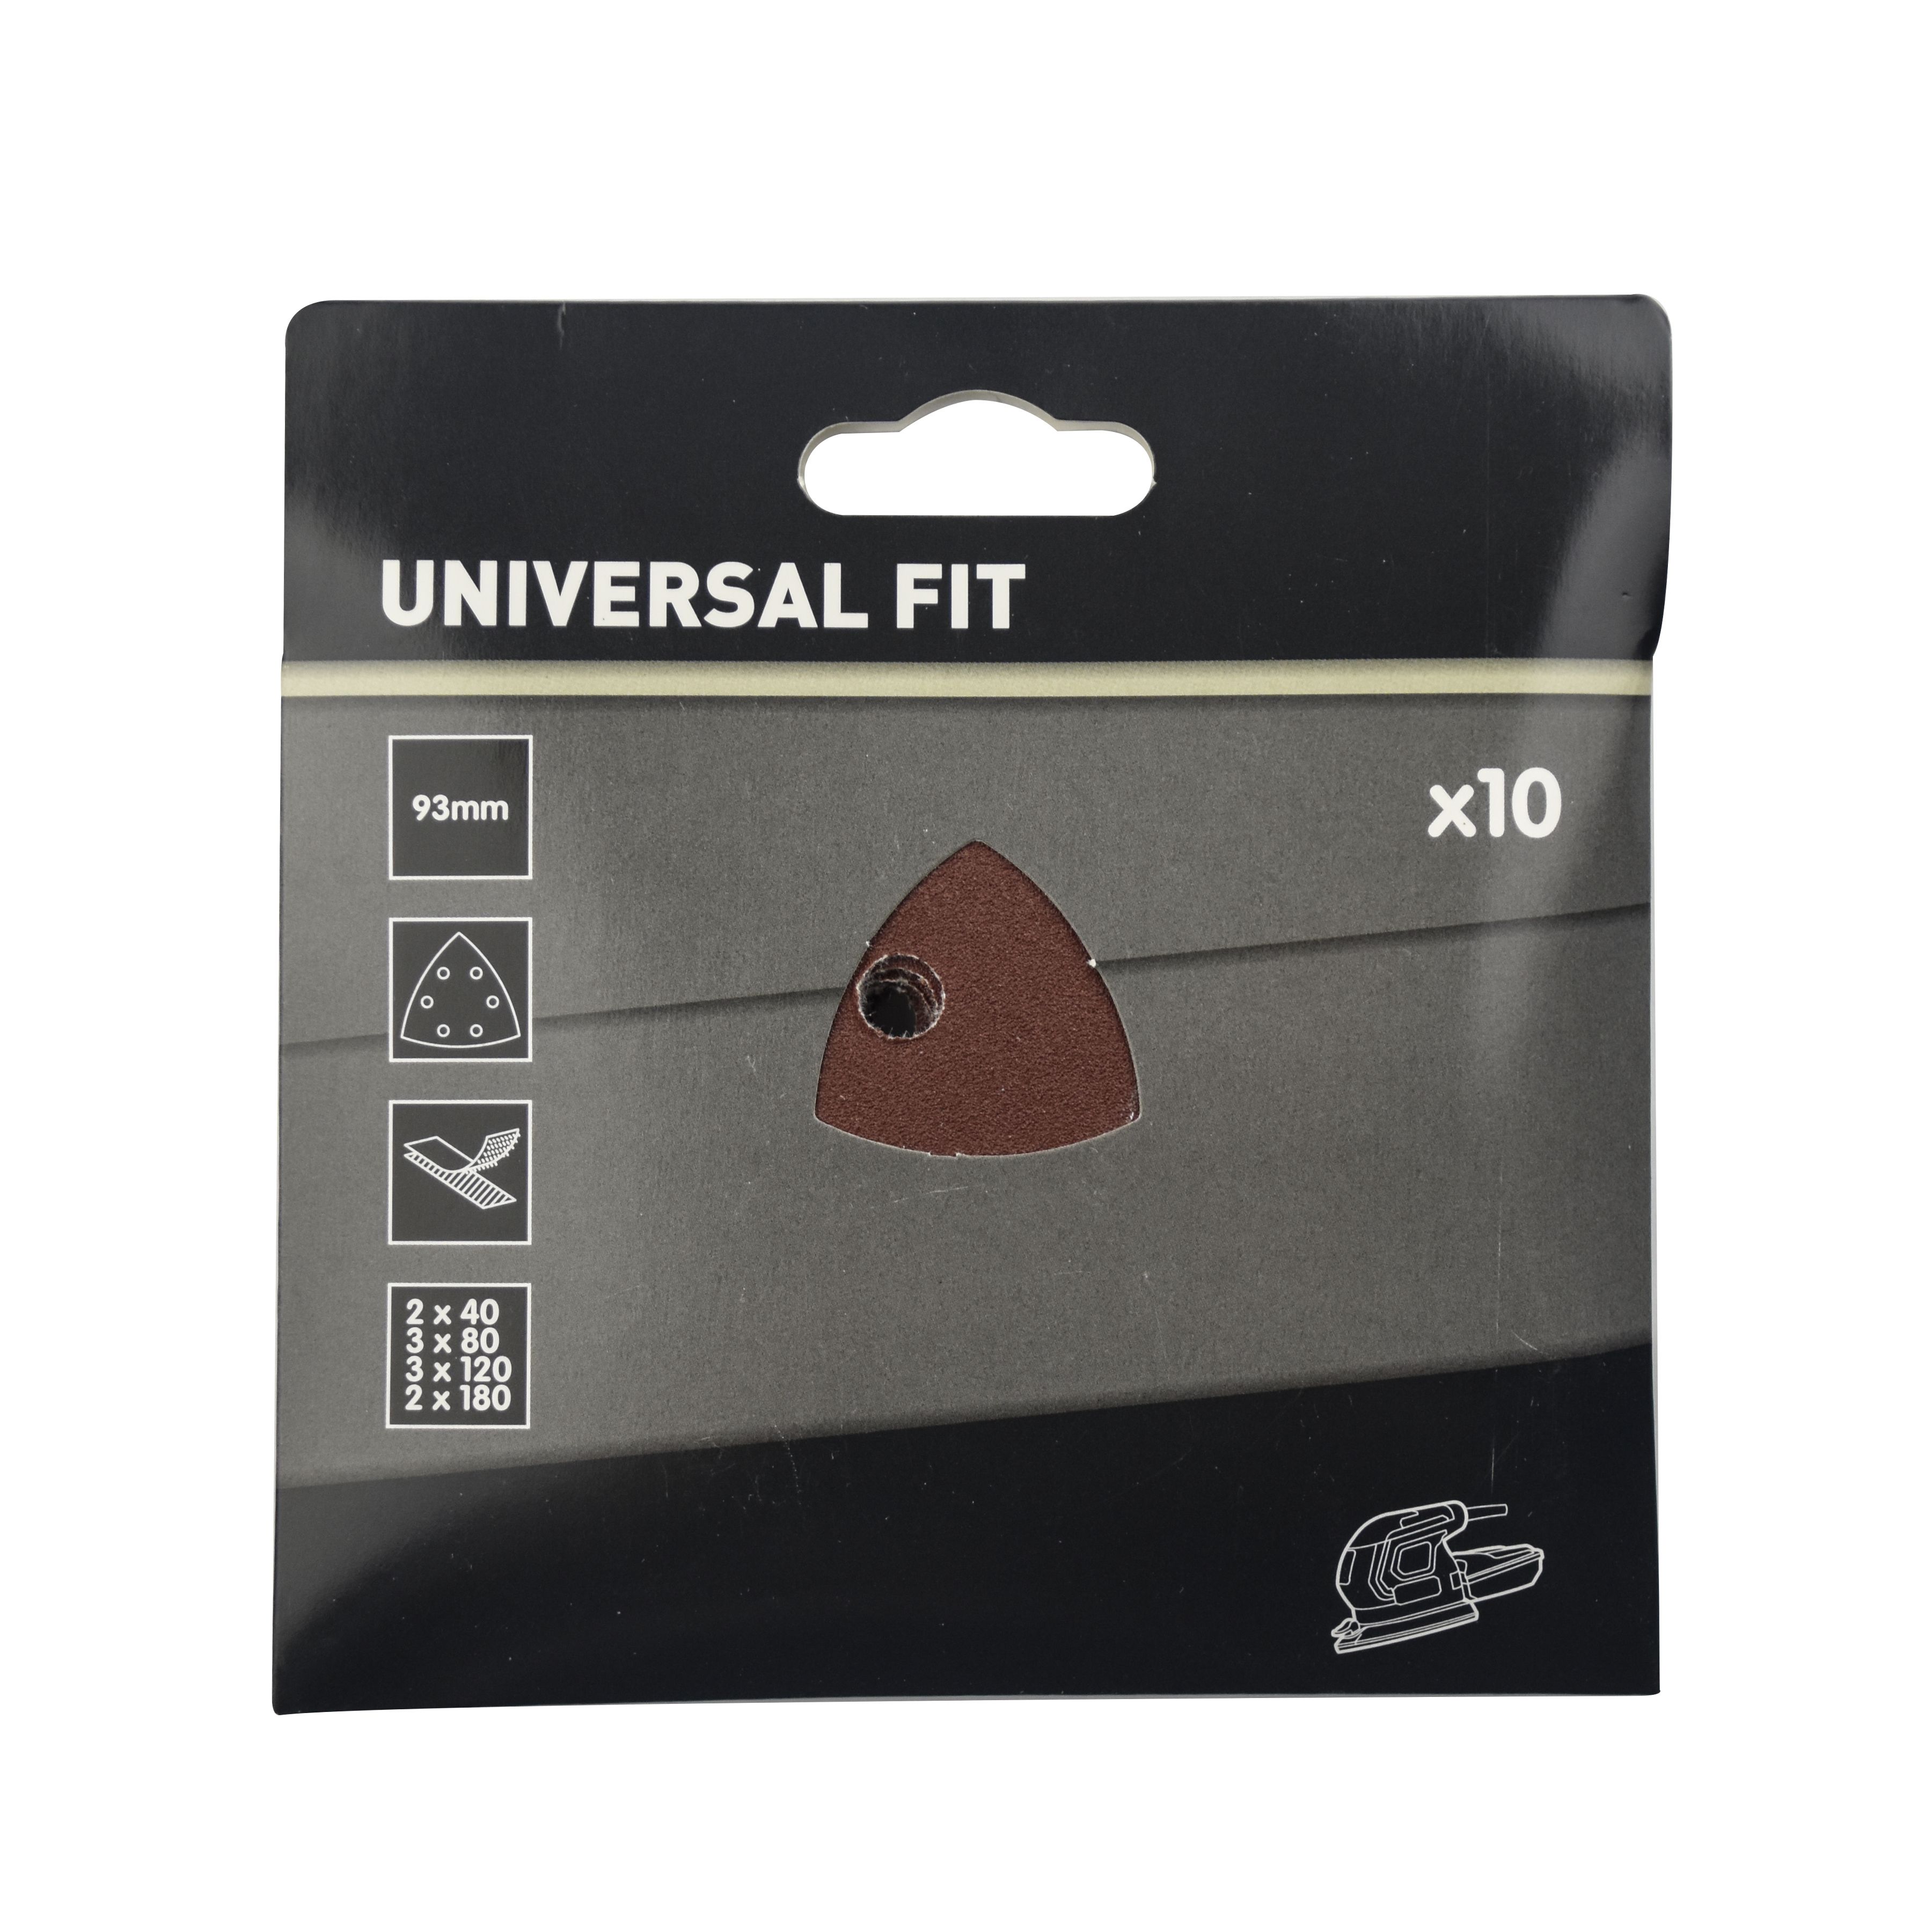 Universal Fit Assorted Punched Sanding sheet set (L)93mm (W)93mm, Pack of 10